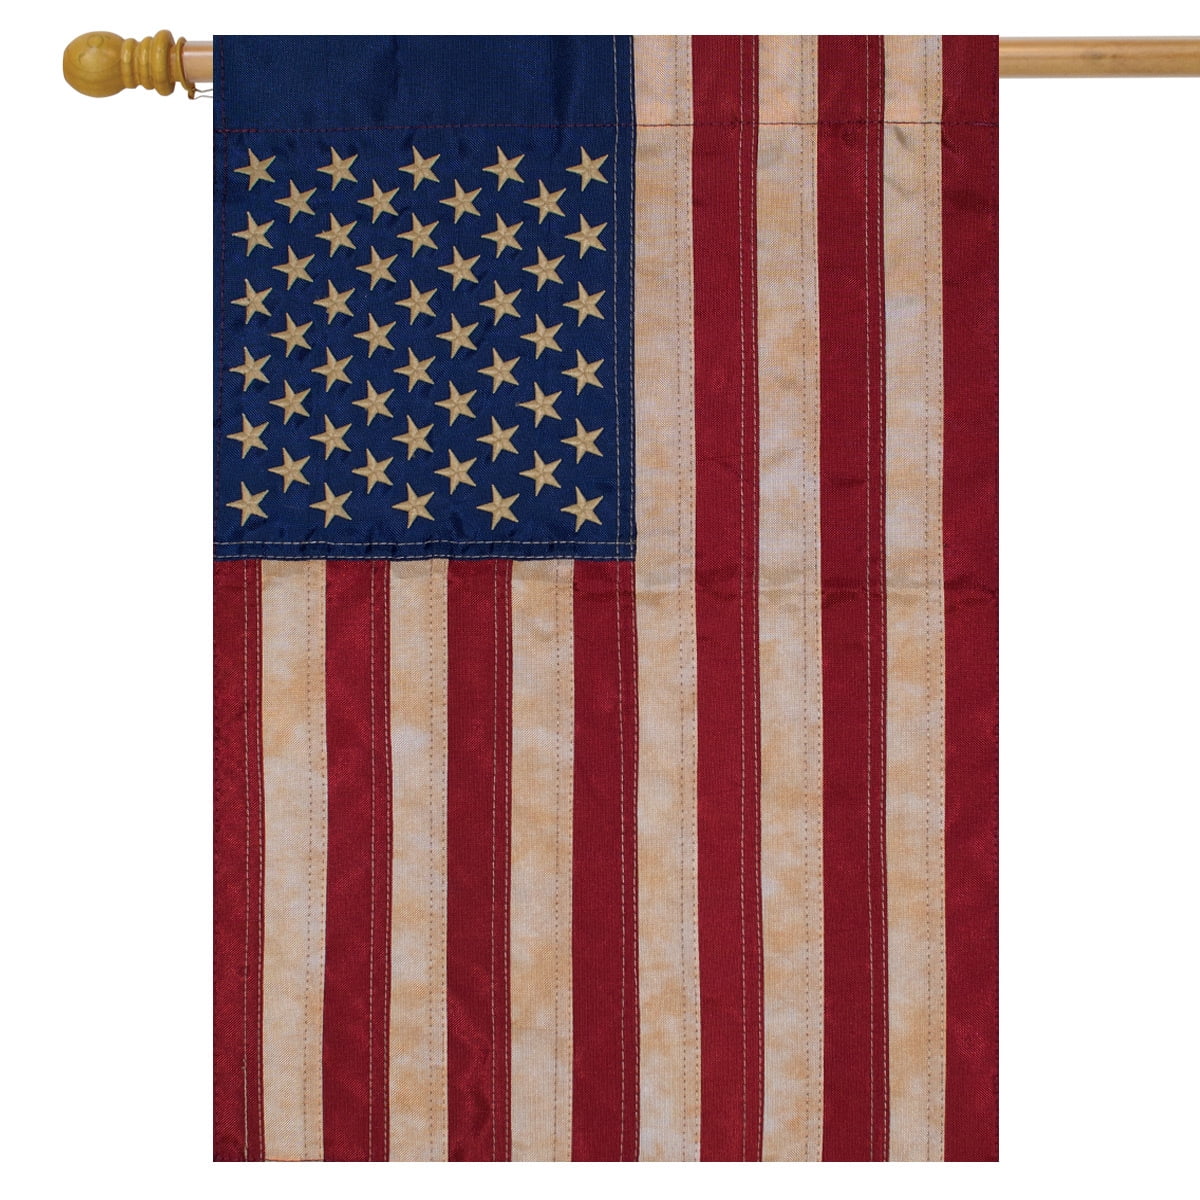 BETSY ROSS AMERICAN FLAG 13 Stars 28" x 17" AGED Tea Stained Americana Primitive 